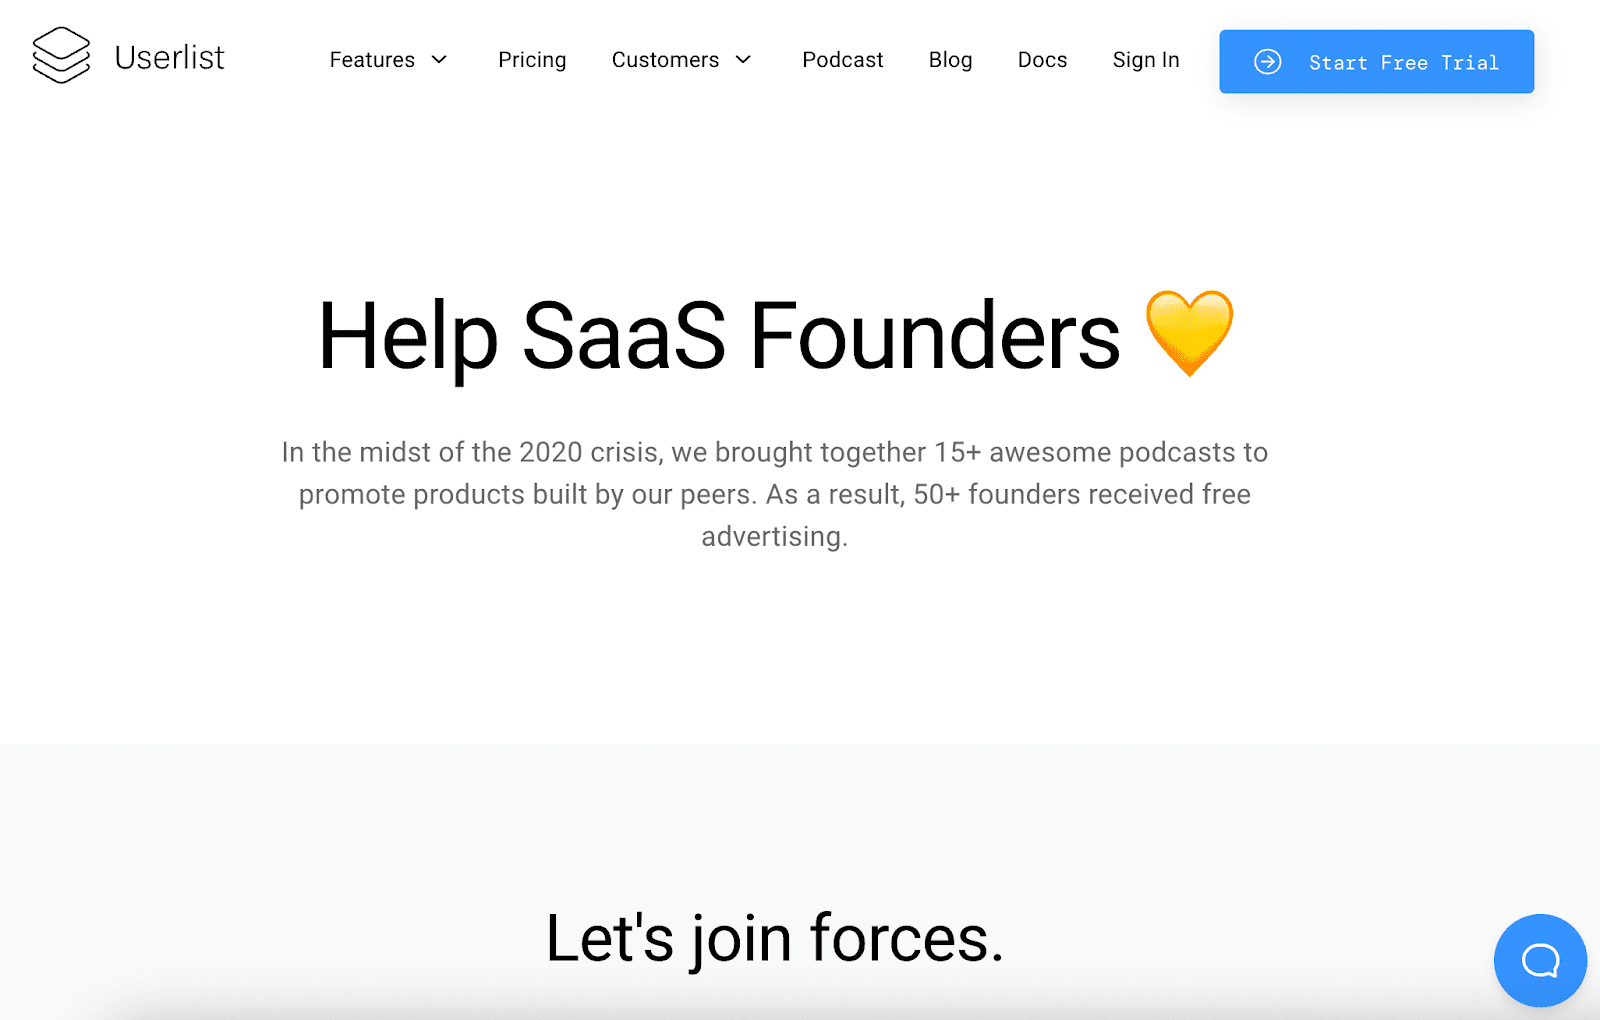 Userlist's Help Founders Campaign